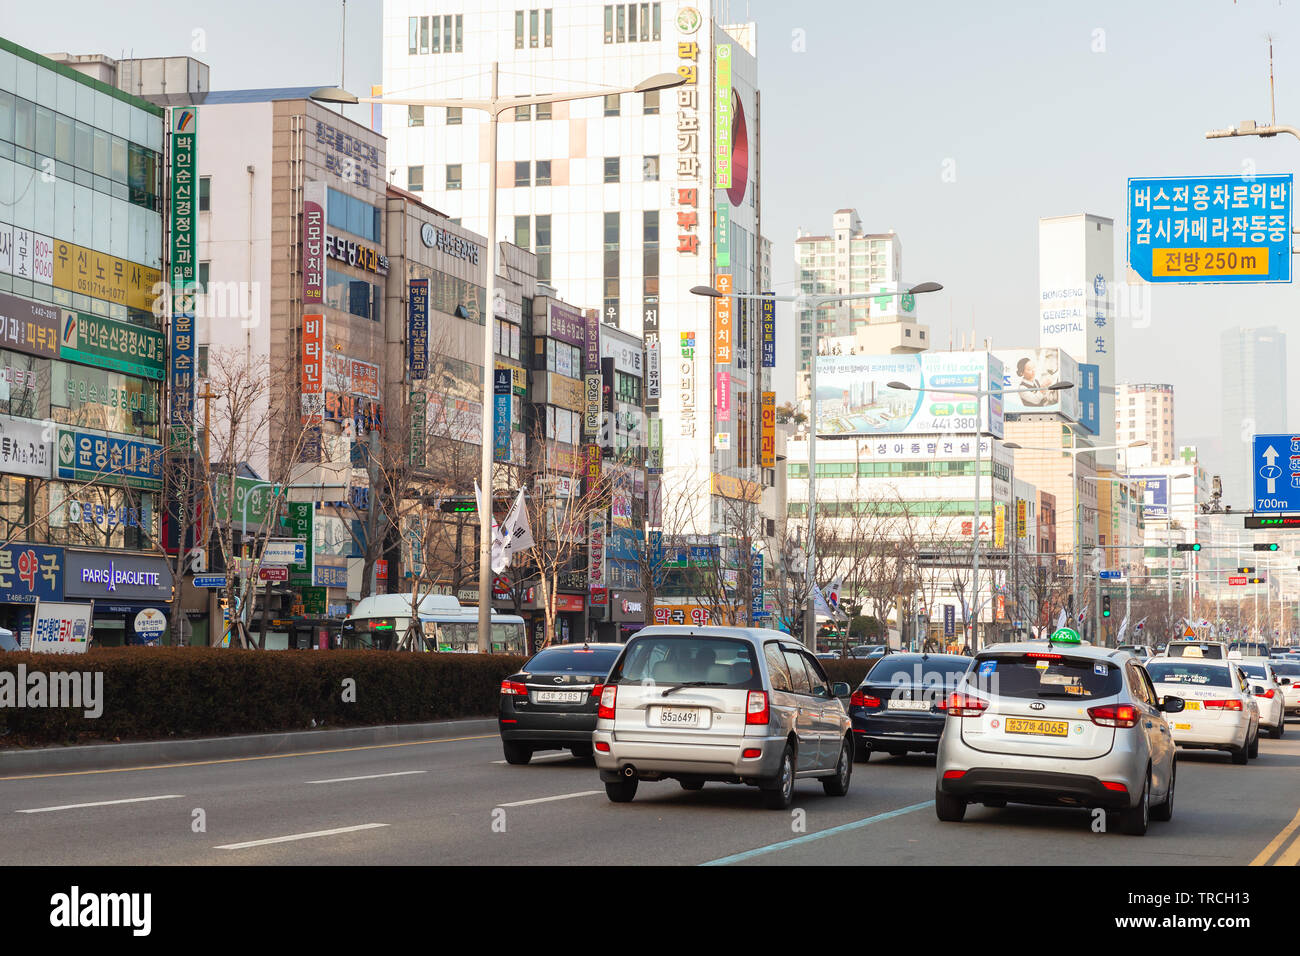 Busan, South Korea - March 12, 2018: Cityscape of Busan, street view with cars and people Stock Photo